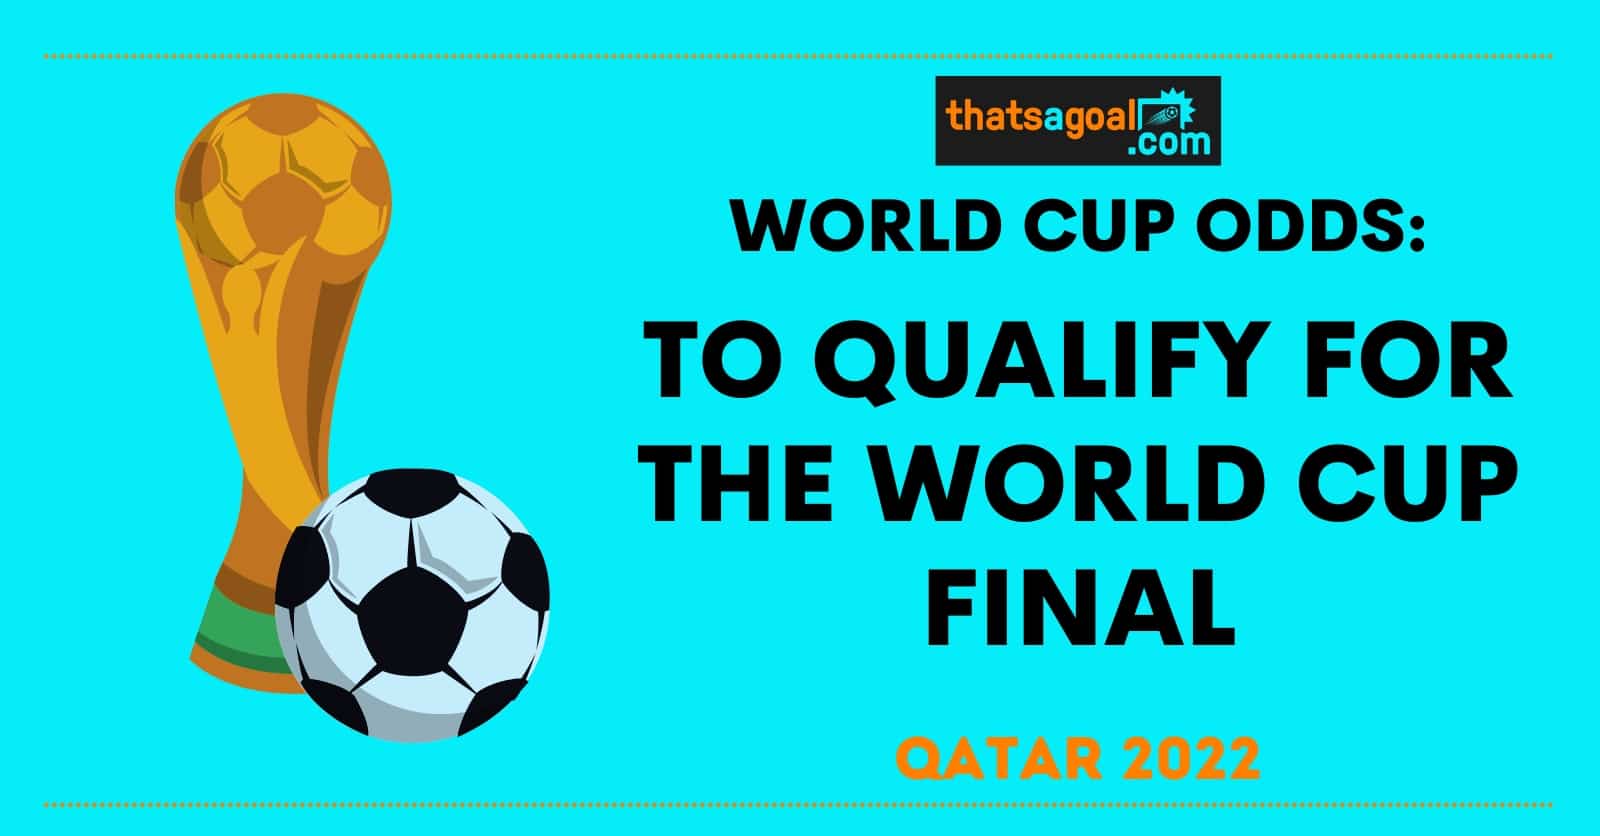 To qualify for the World Cup final odds